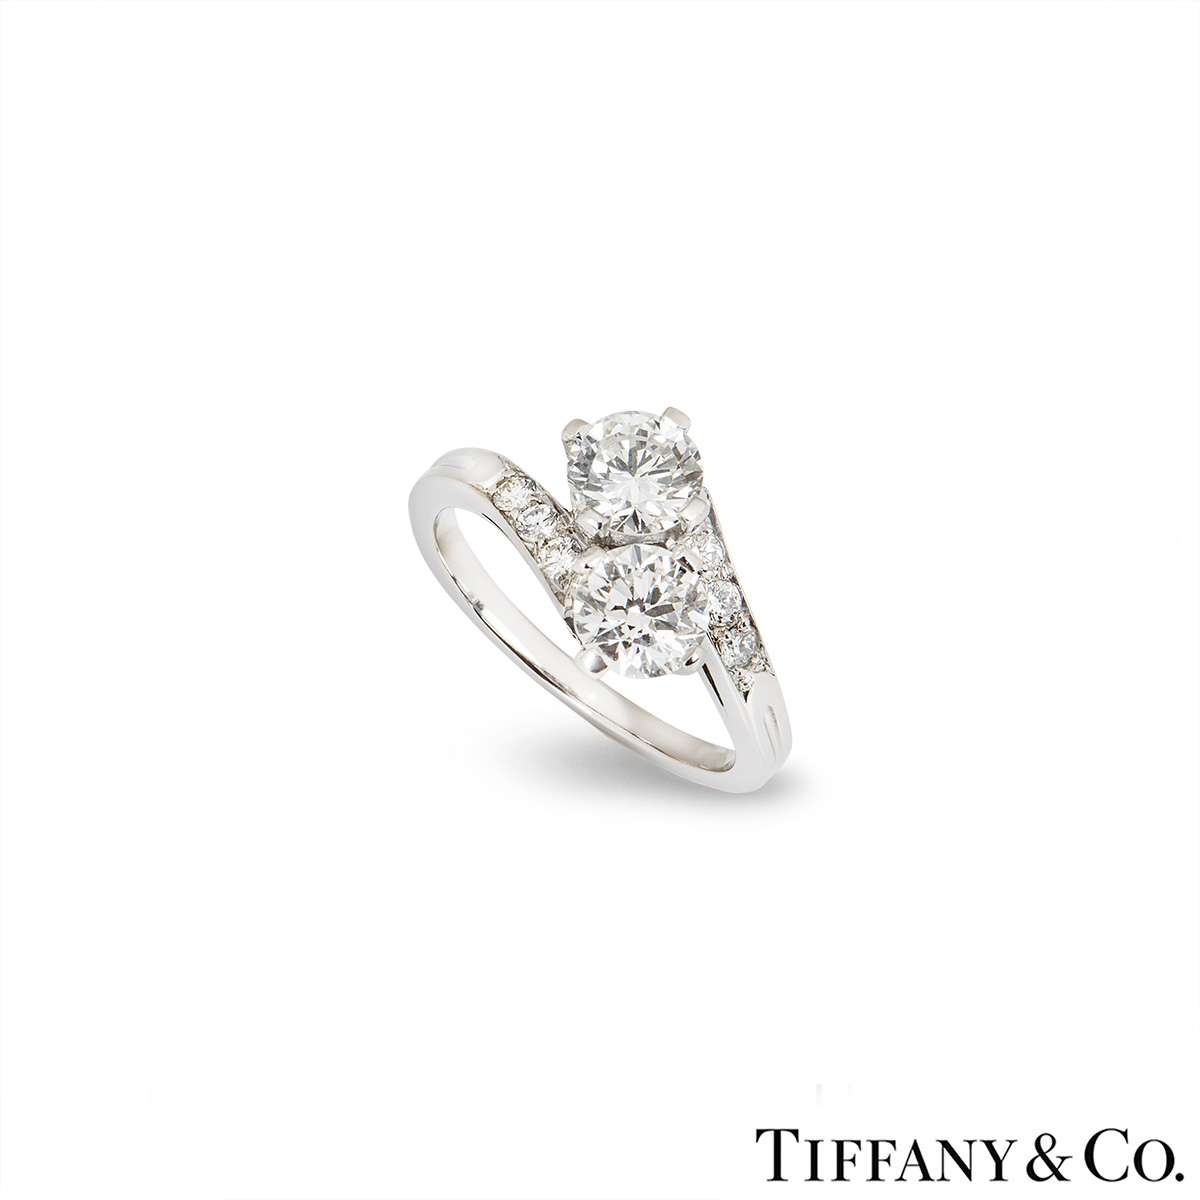 TIFFANY & CO. Vintage Diamond 18K WG Signature Crossover Ring Size 7.5 |  Womens jewelry rings, Old rings, Crossover ring